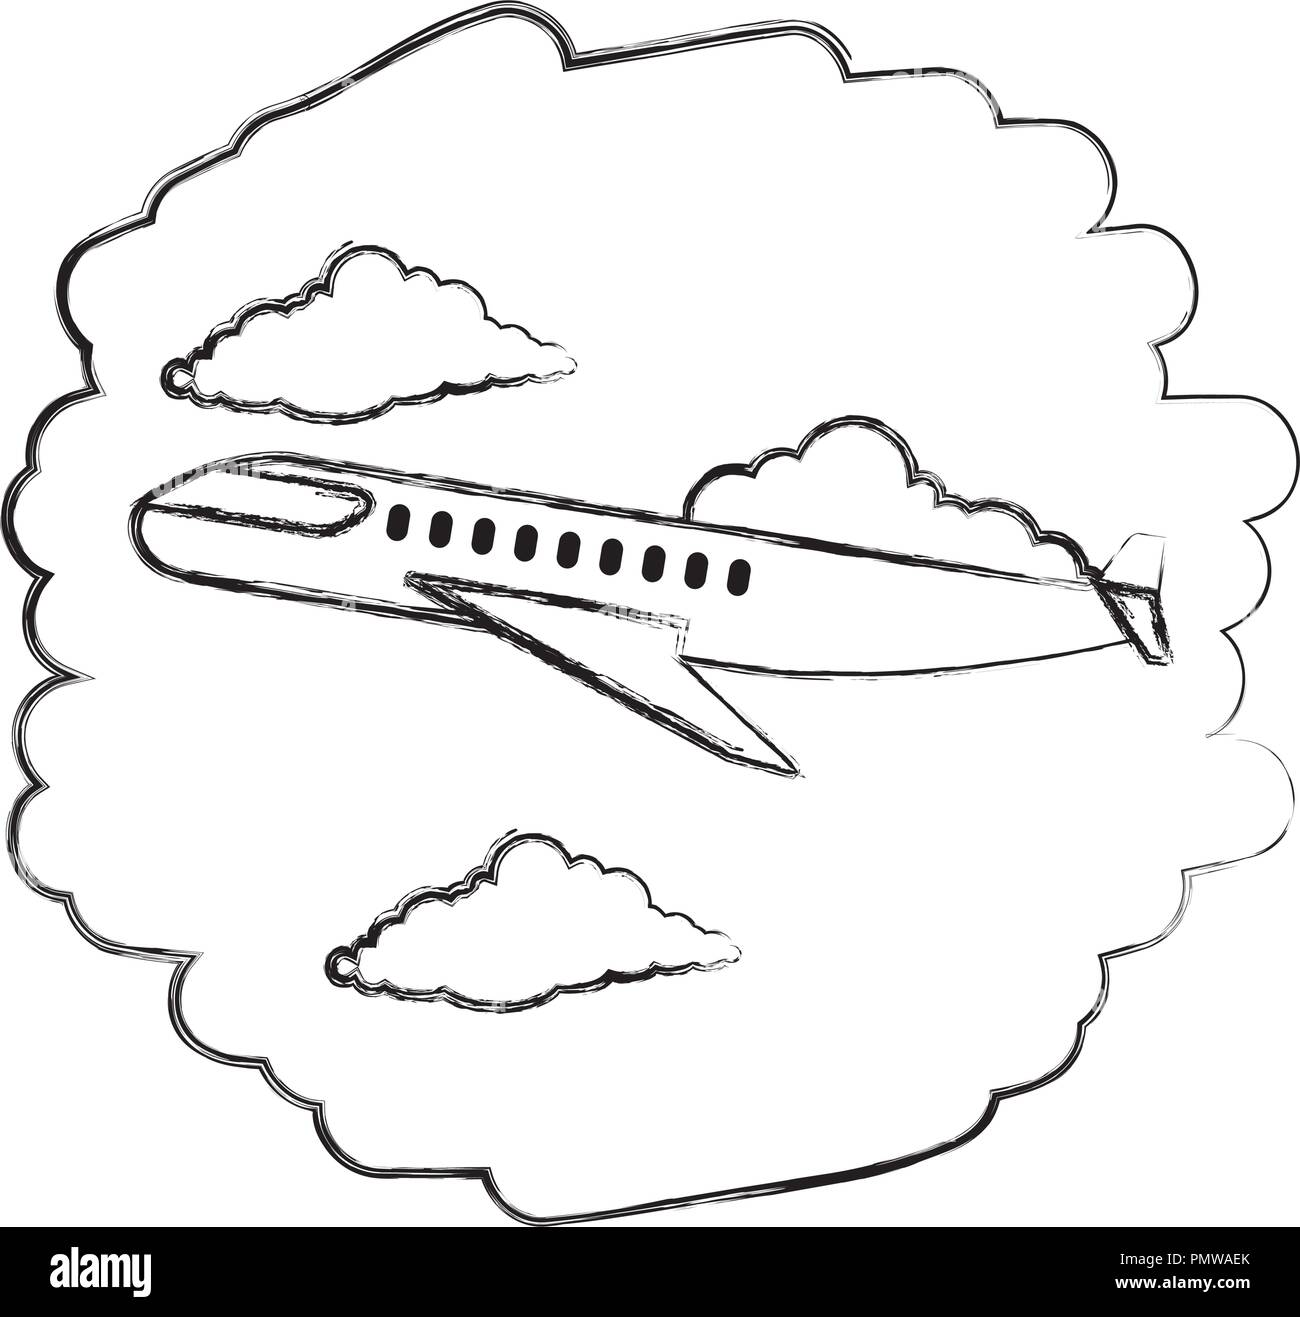 airplane flying on the sky Stock Vector